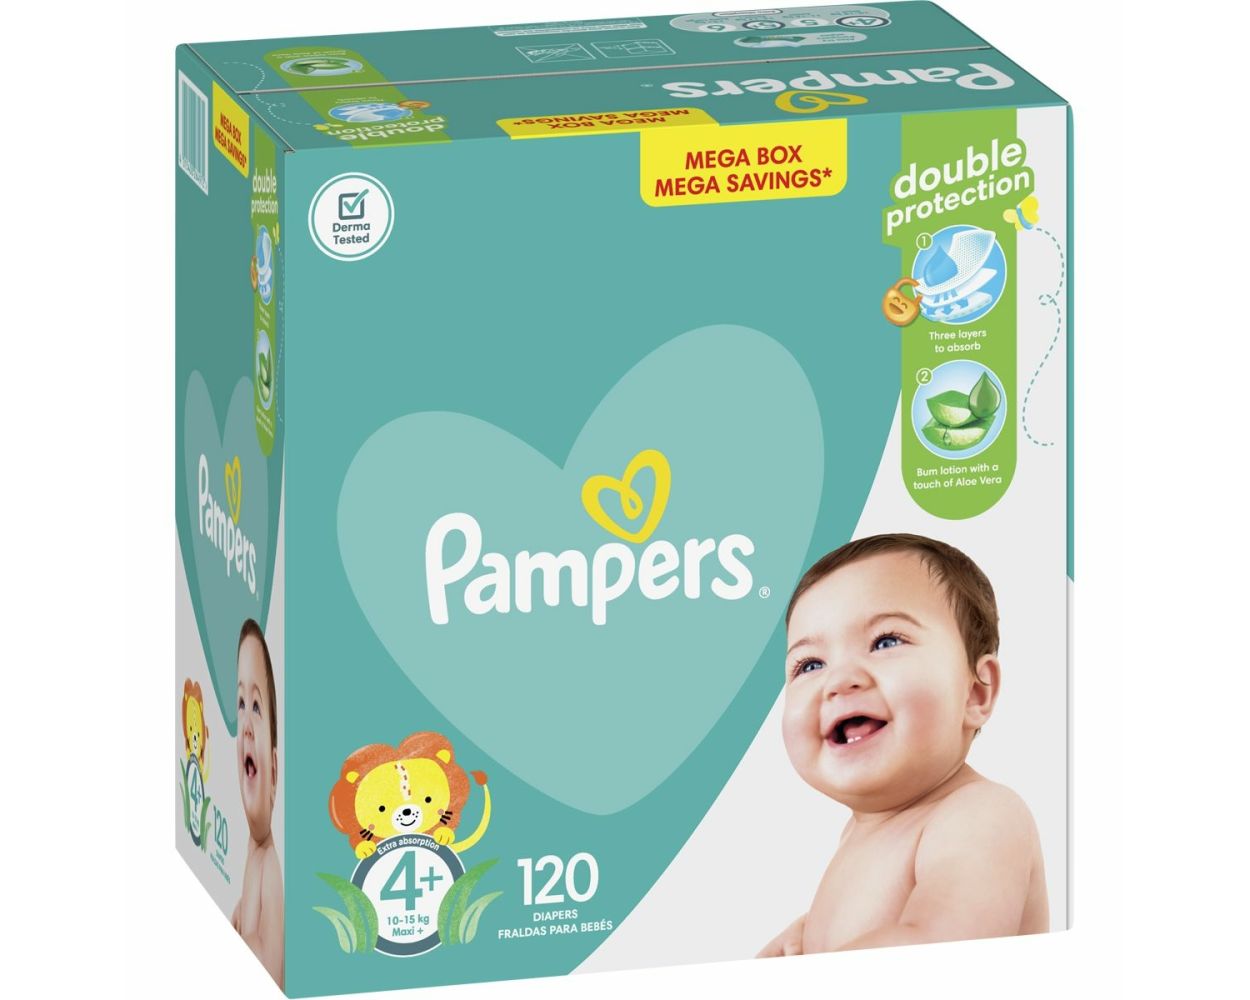 carrefour promocje pampers